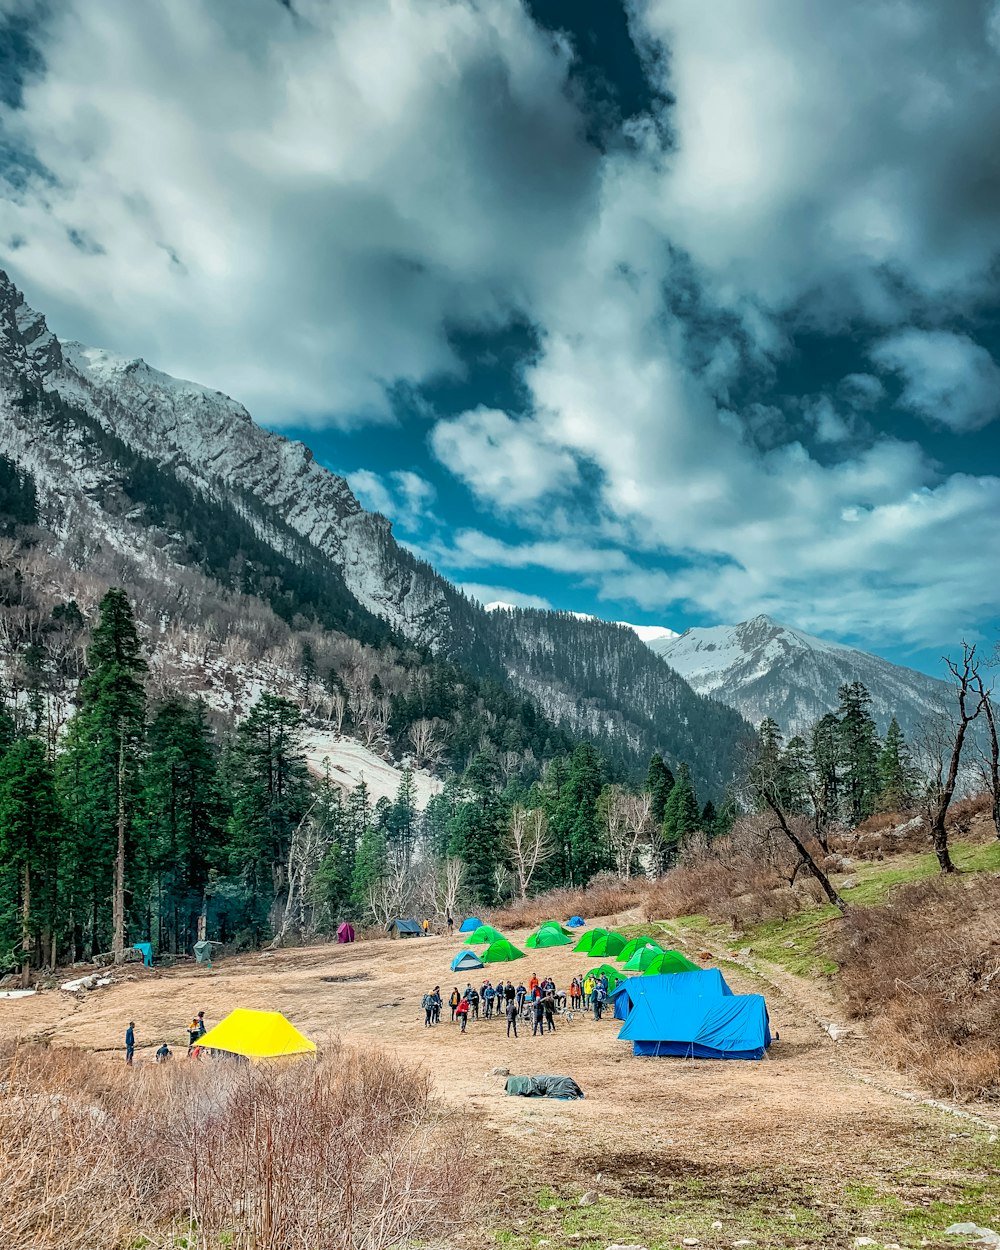 green and yellow tent near green trees and mountain under white clouds and blue sky during